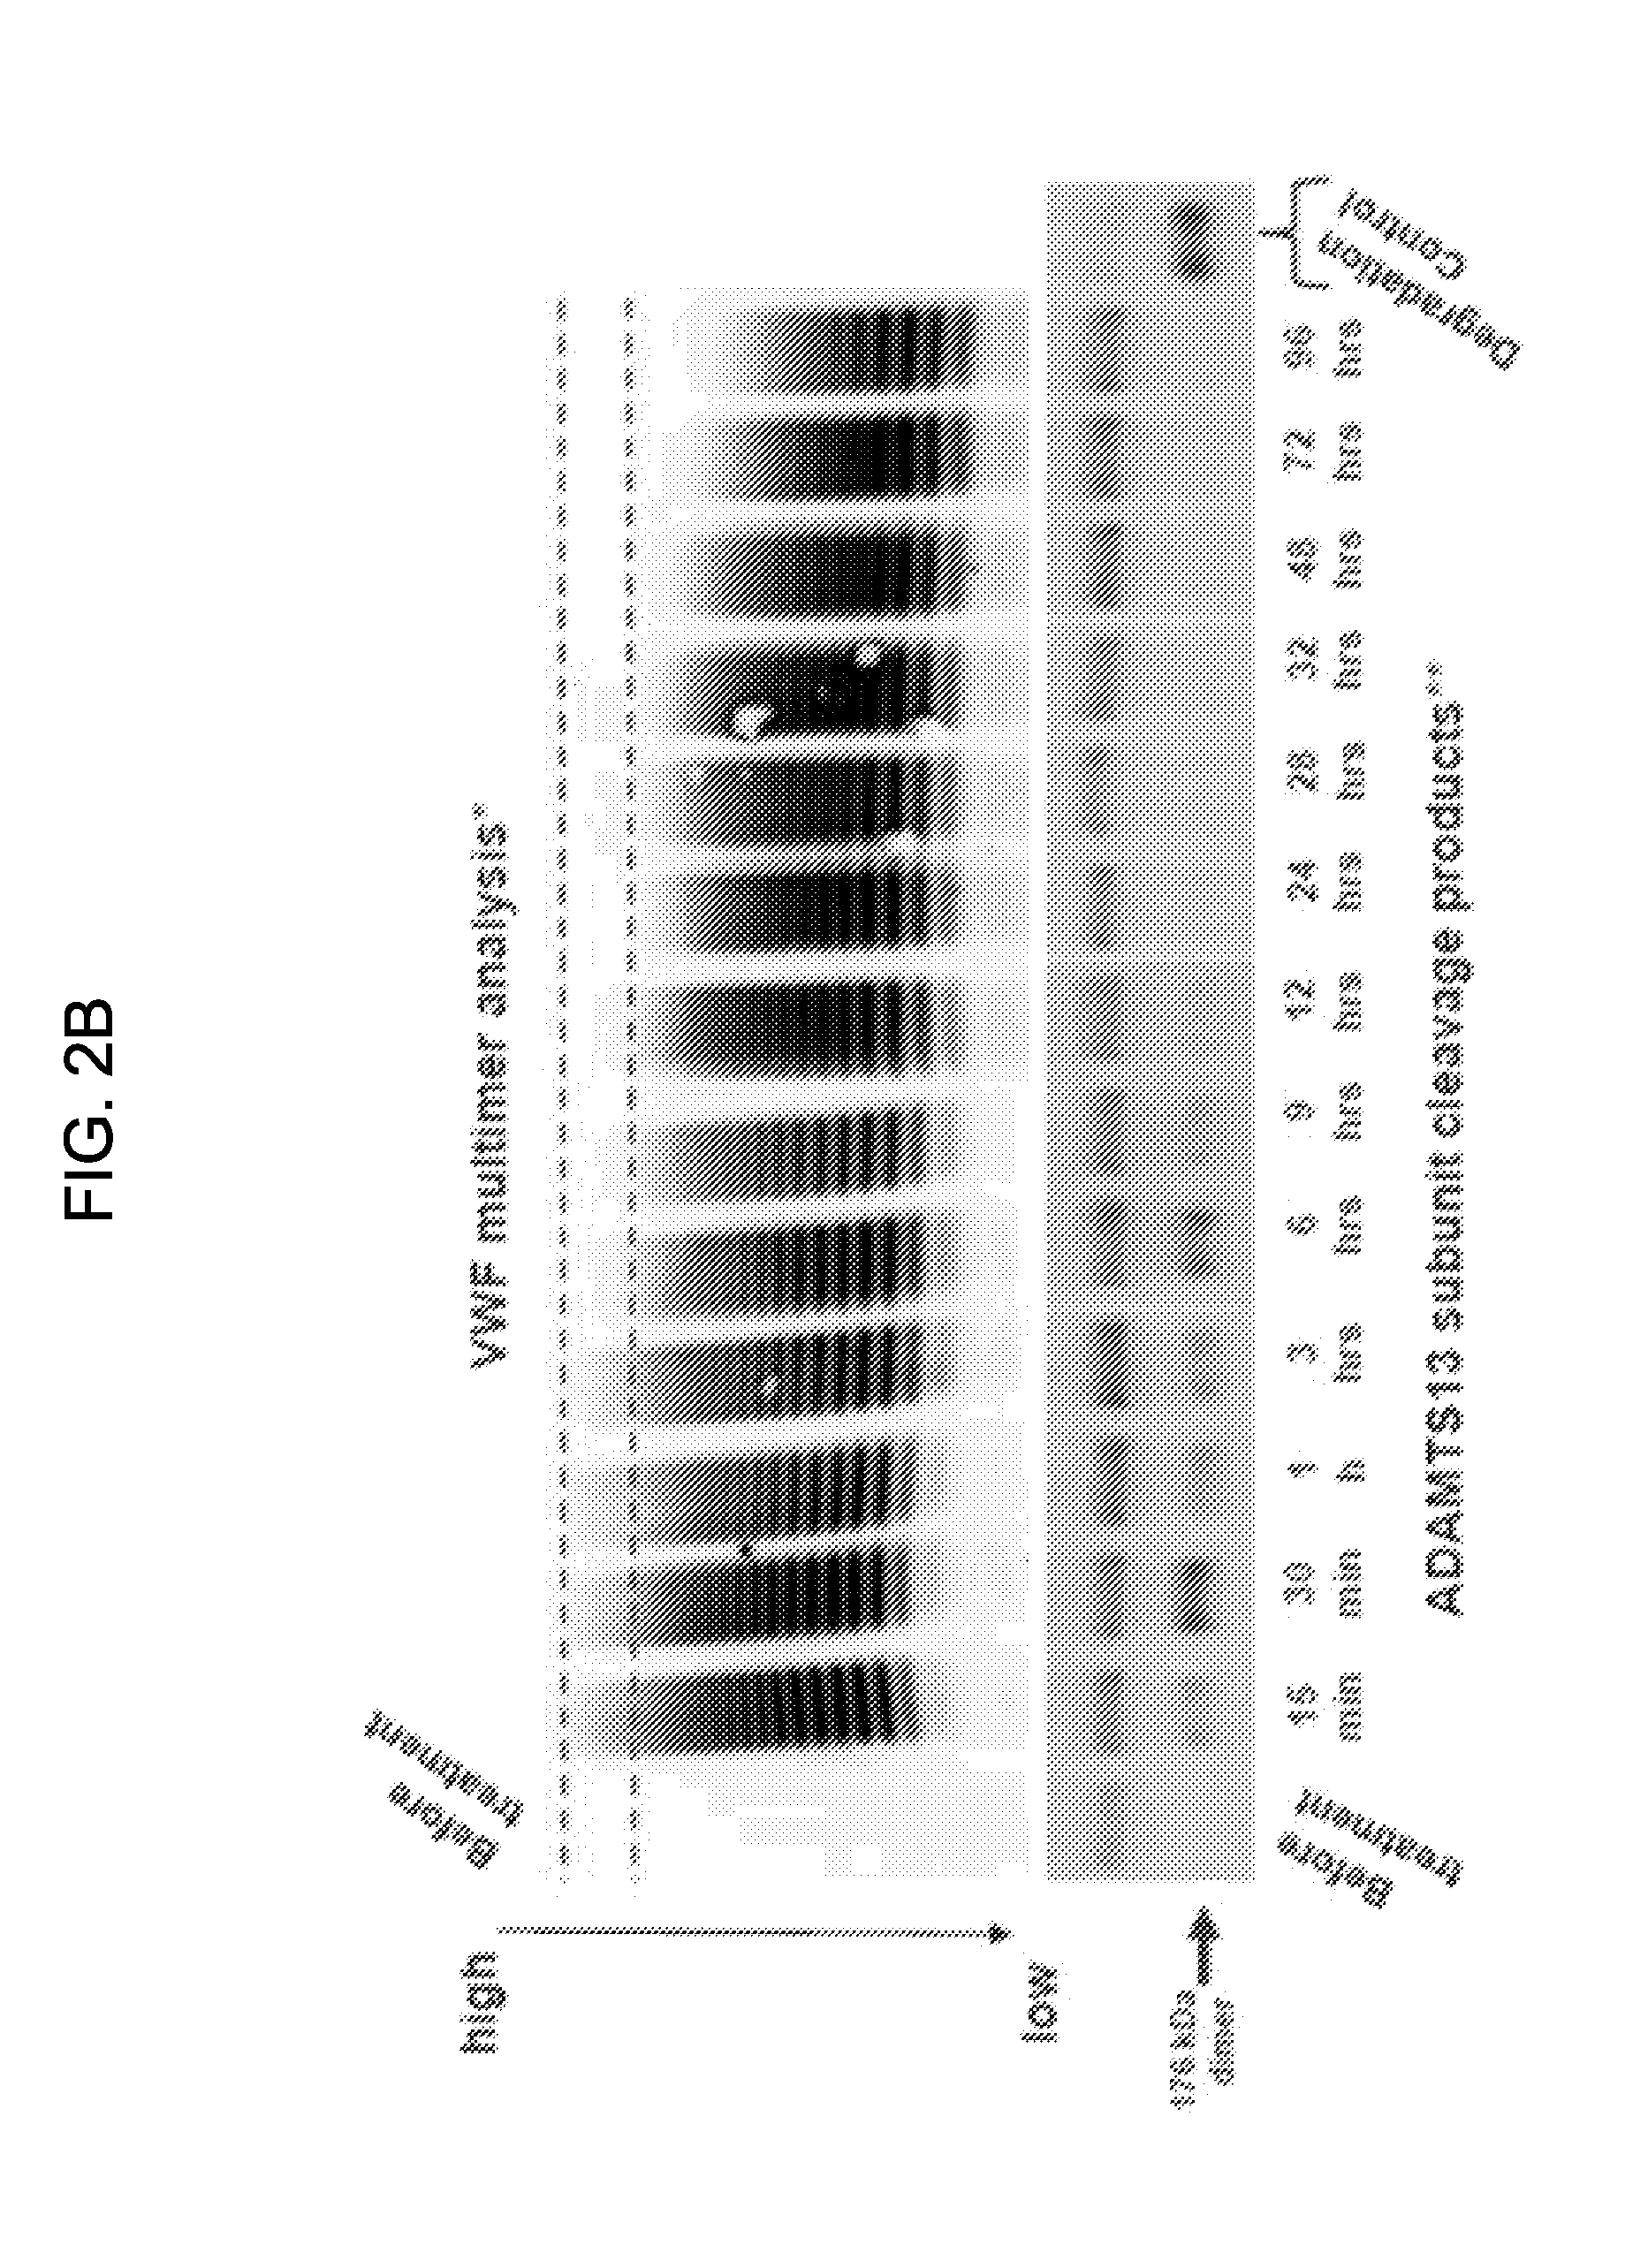 Treatment of coagulation disease by administration of recombinant vwf